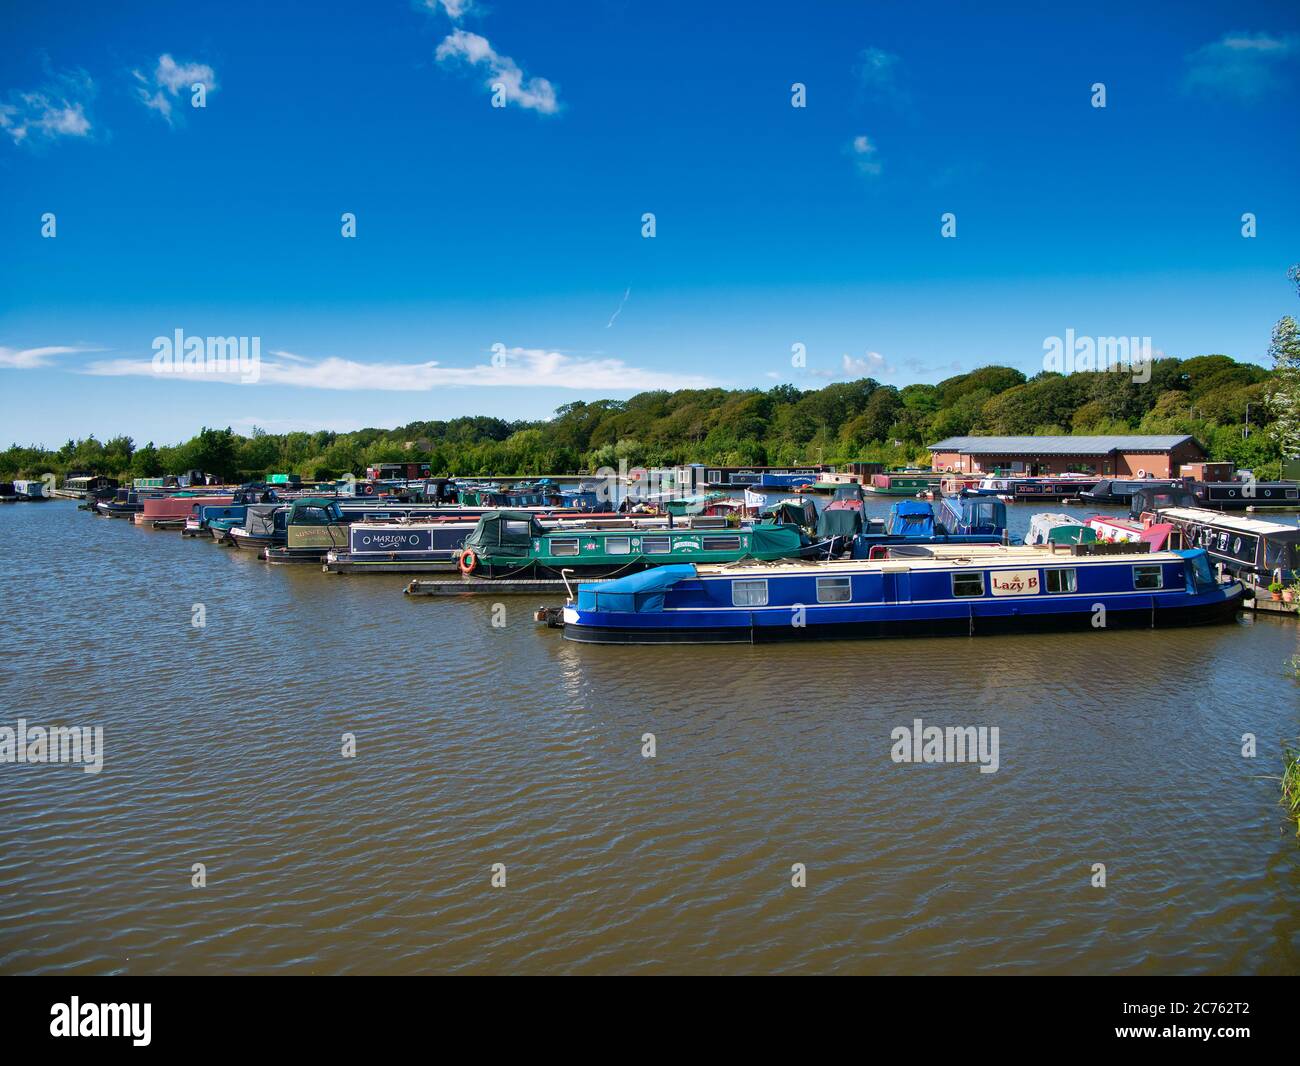 Narrowboats moored at pontoons at Scarisbrick Marina on the Leeds Liverpool Canal in Lancashire in the UK. Taken on a sunny day. Stock Photo